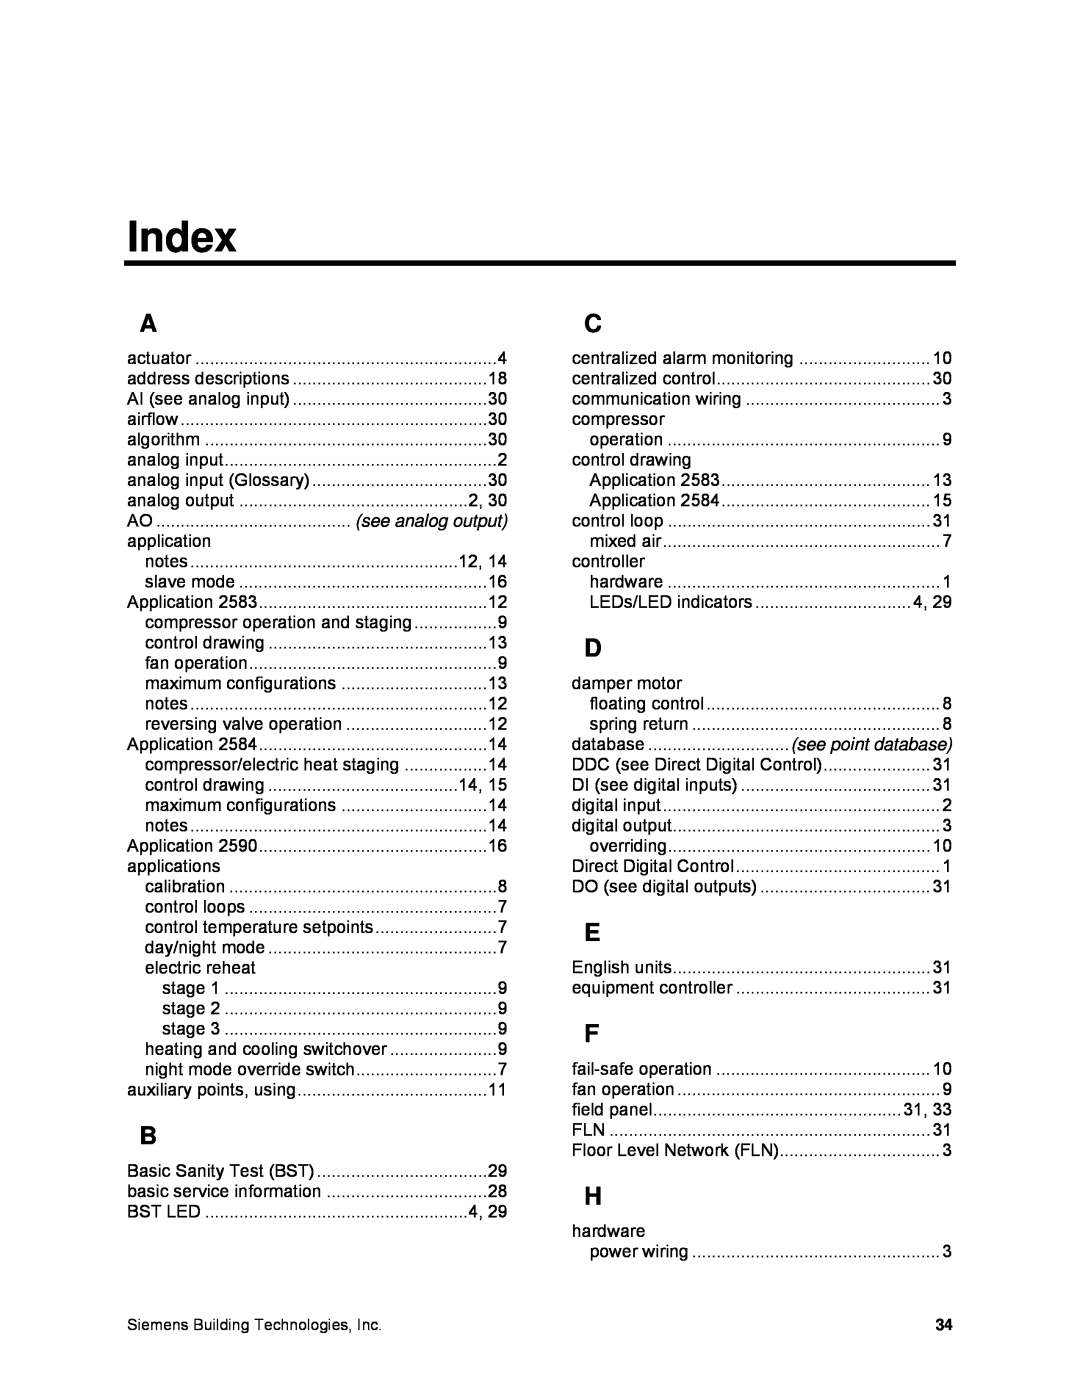 Siemens 125-699 owner manual Index, see analog output, see point database 